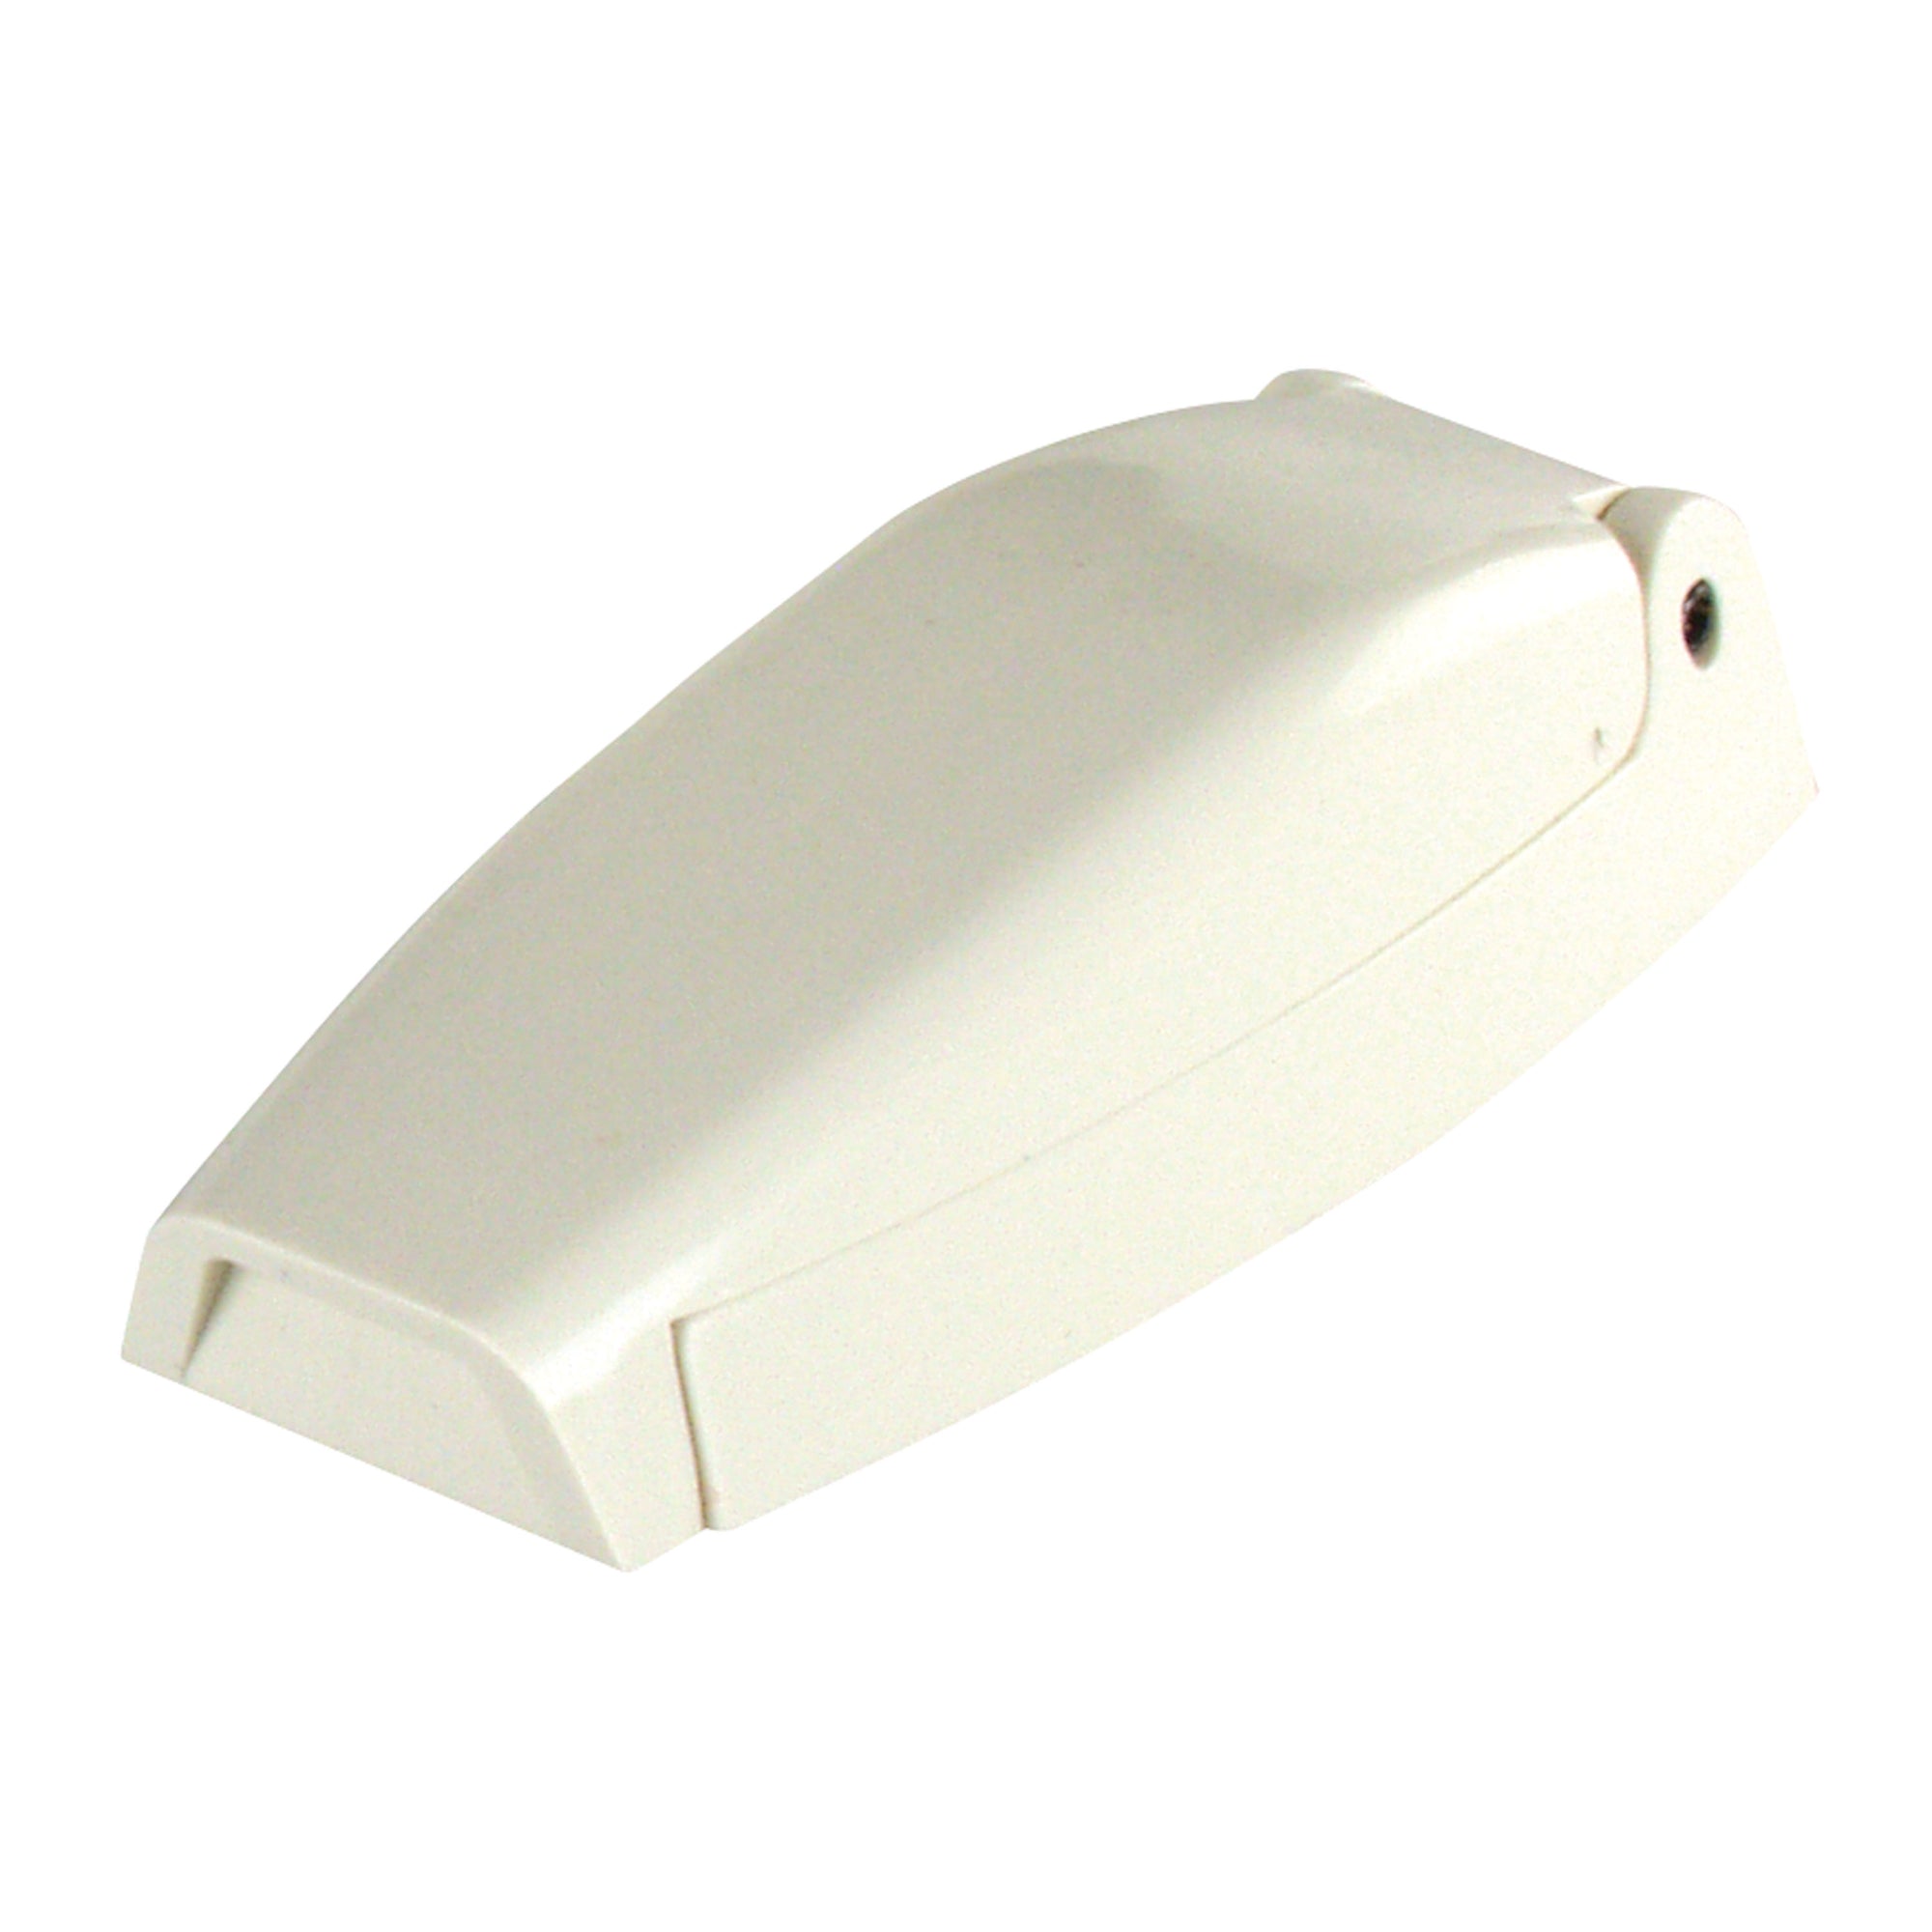 JR Products 10254 Baggage Door Catch - Colonial White, Pack of 2